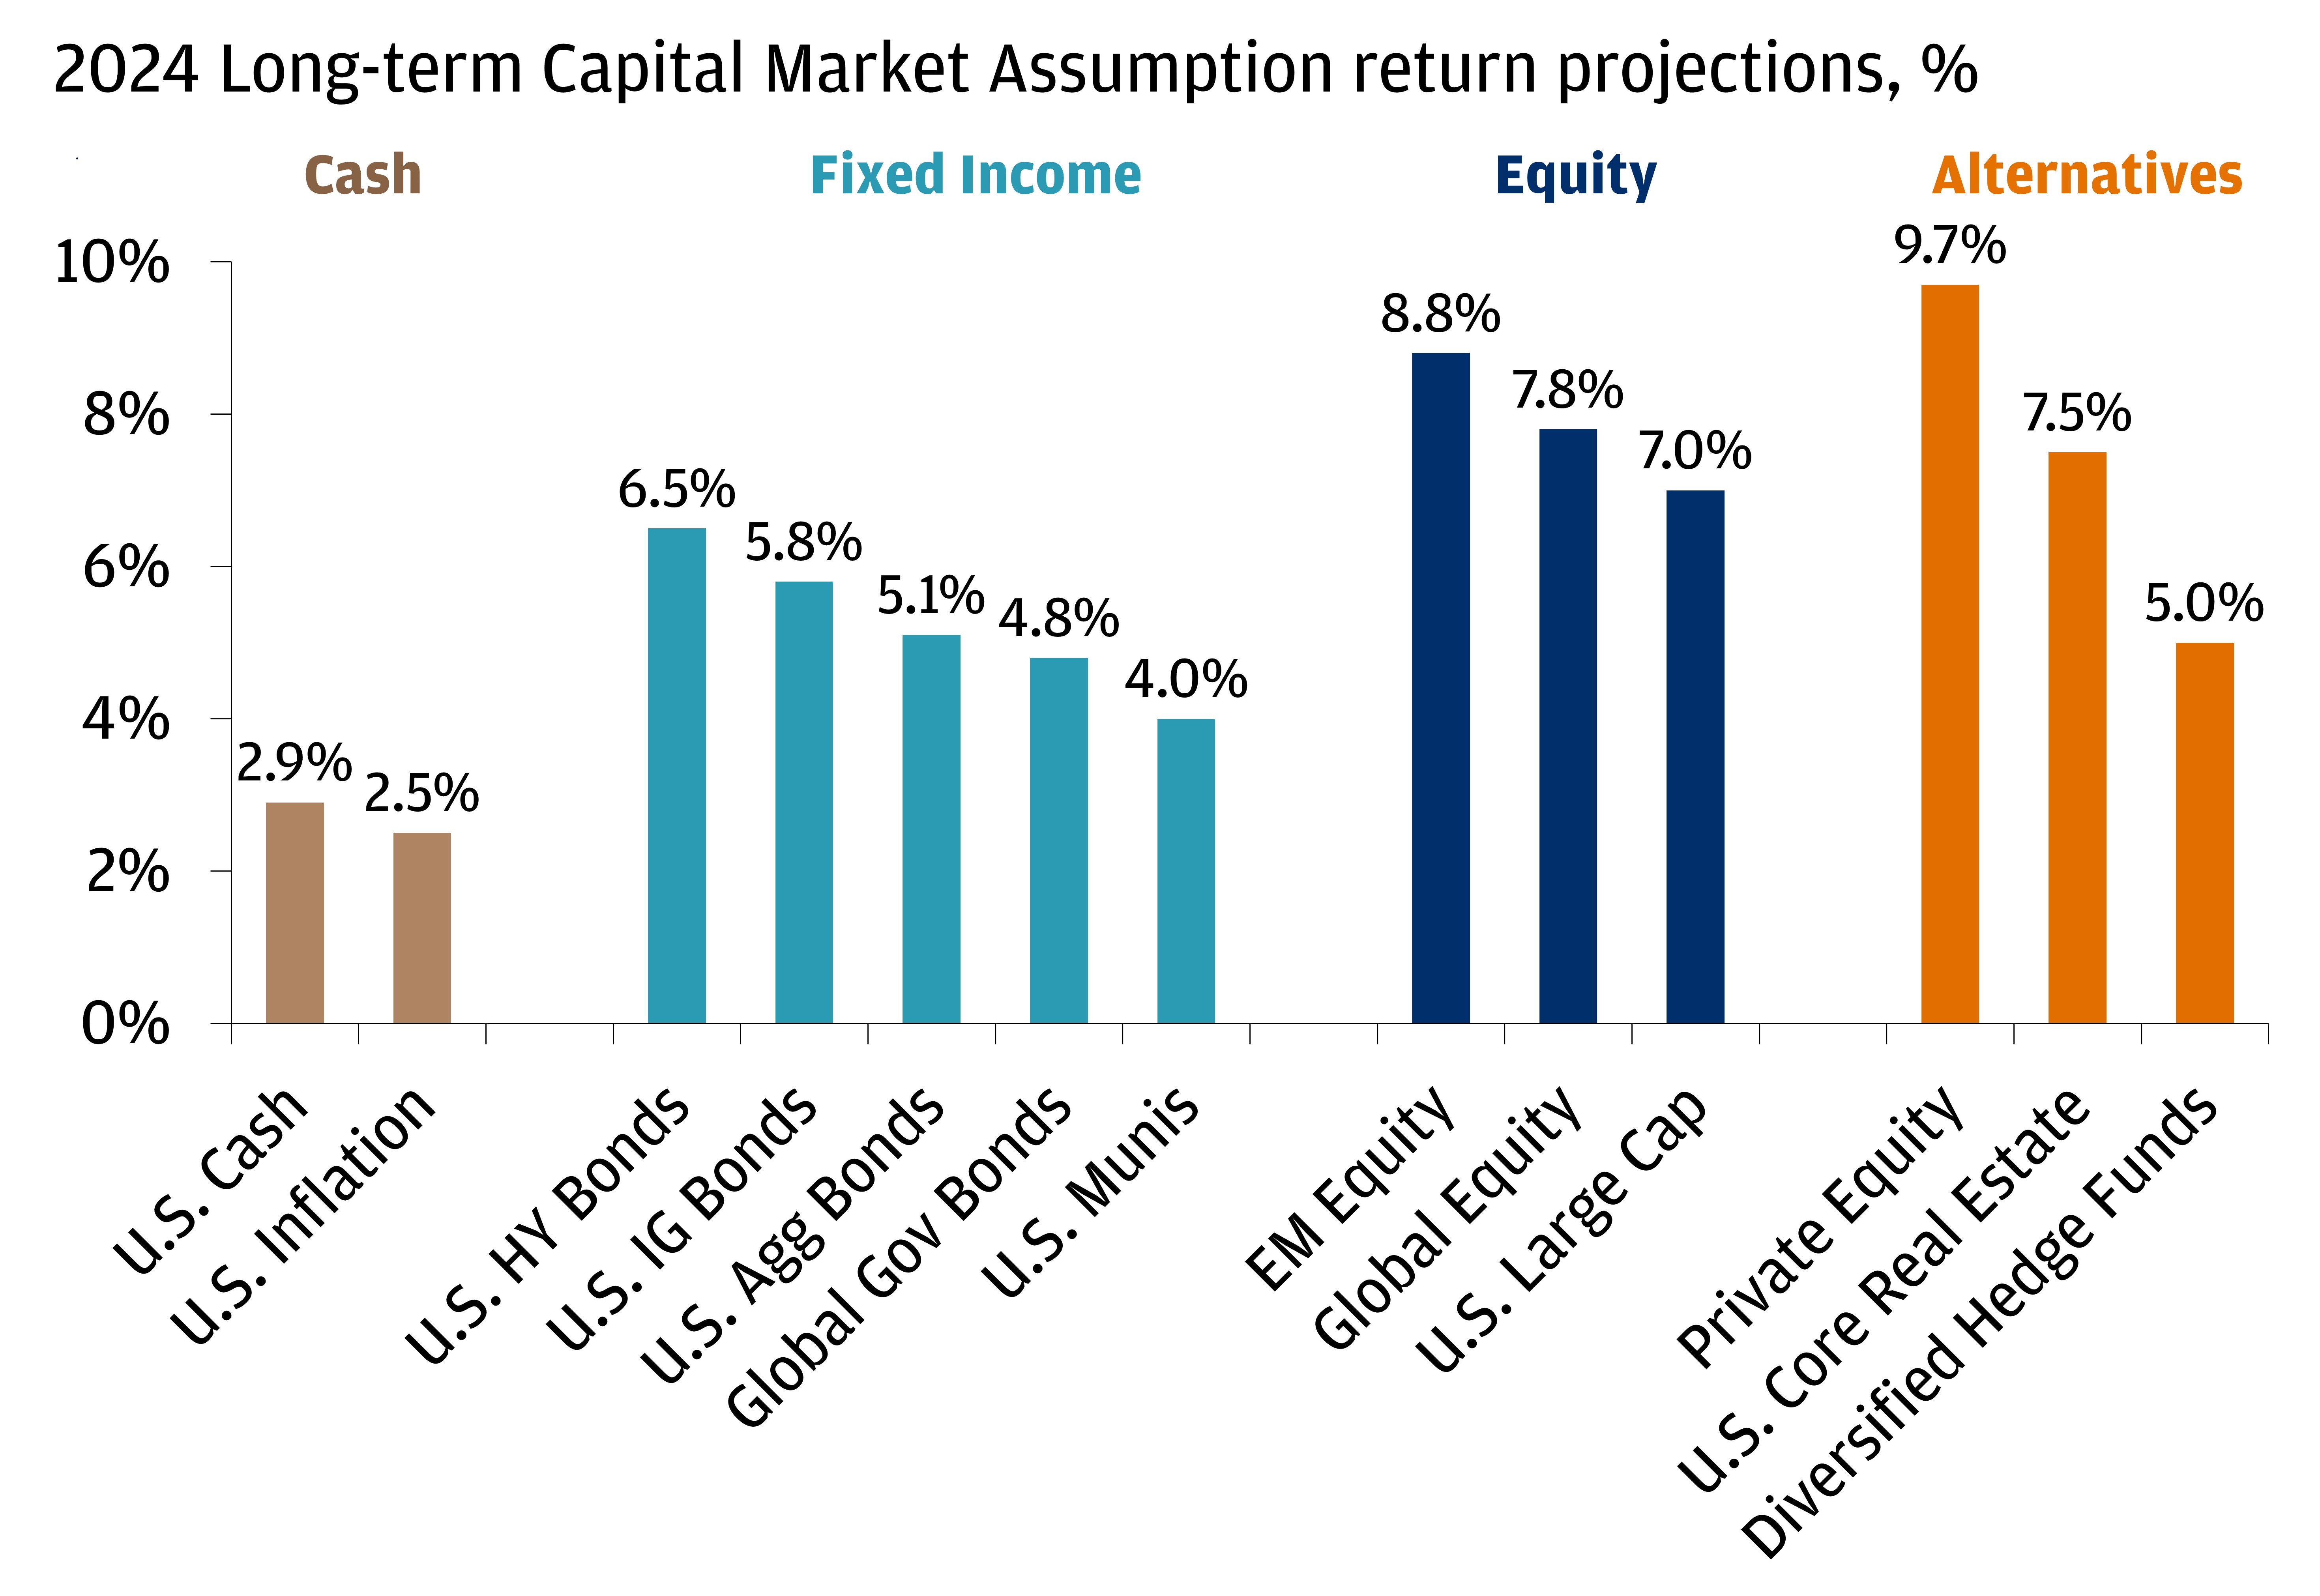 This chart shows the J.P. Morgan Asset Management Long-Term Capital Market Assumptions across the categories of cash, fixed income, equity and alternatives.